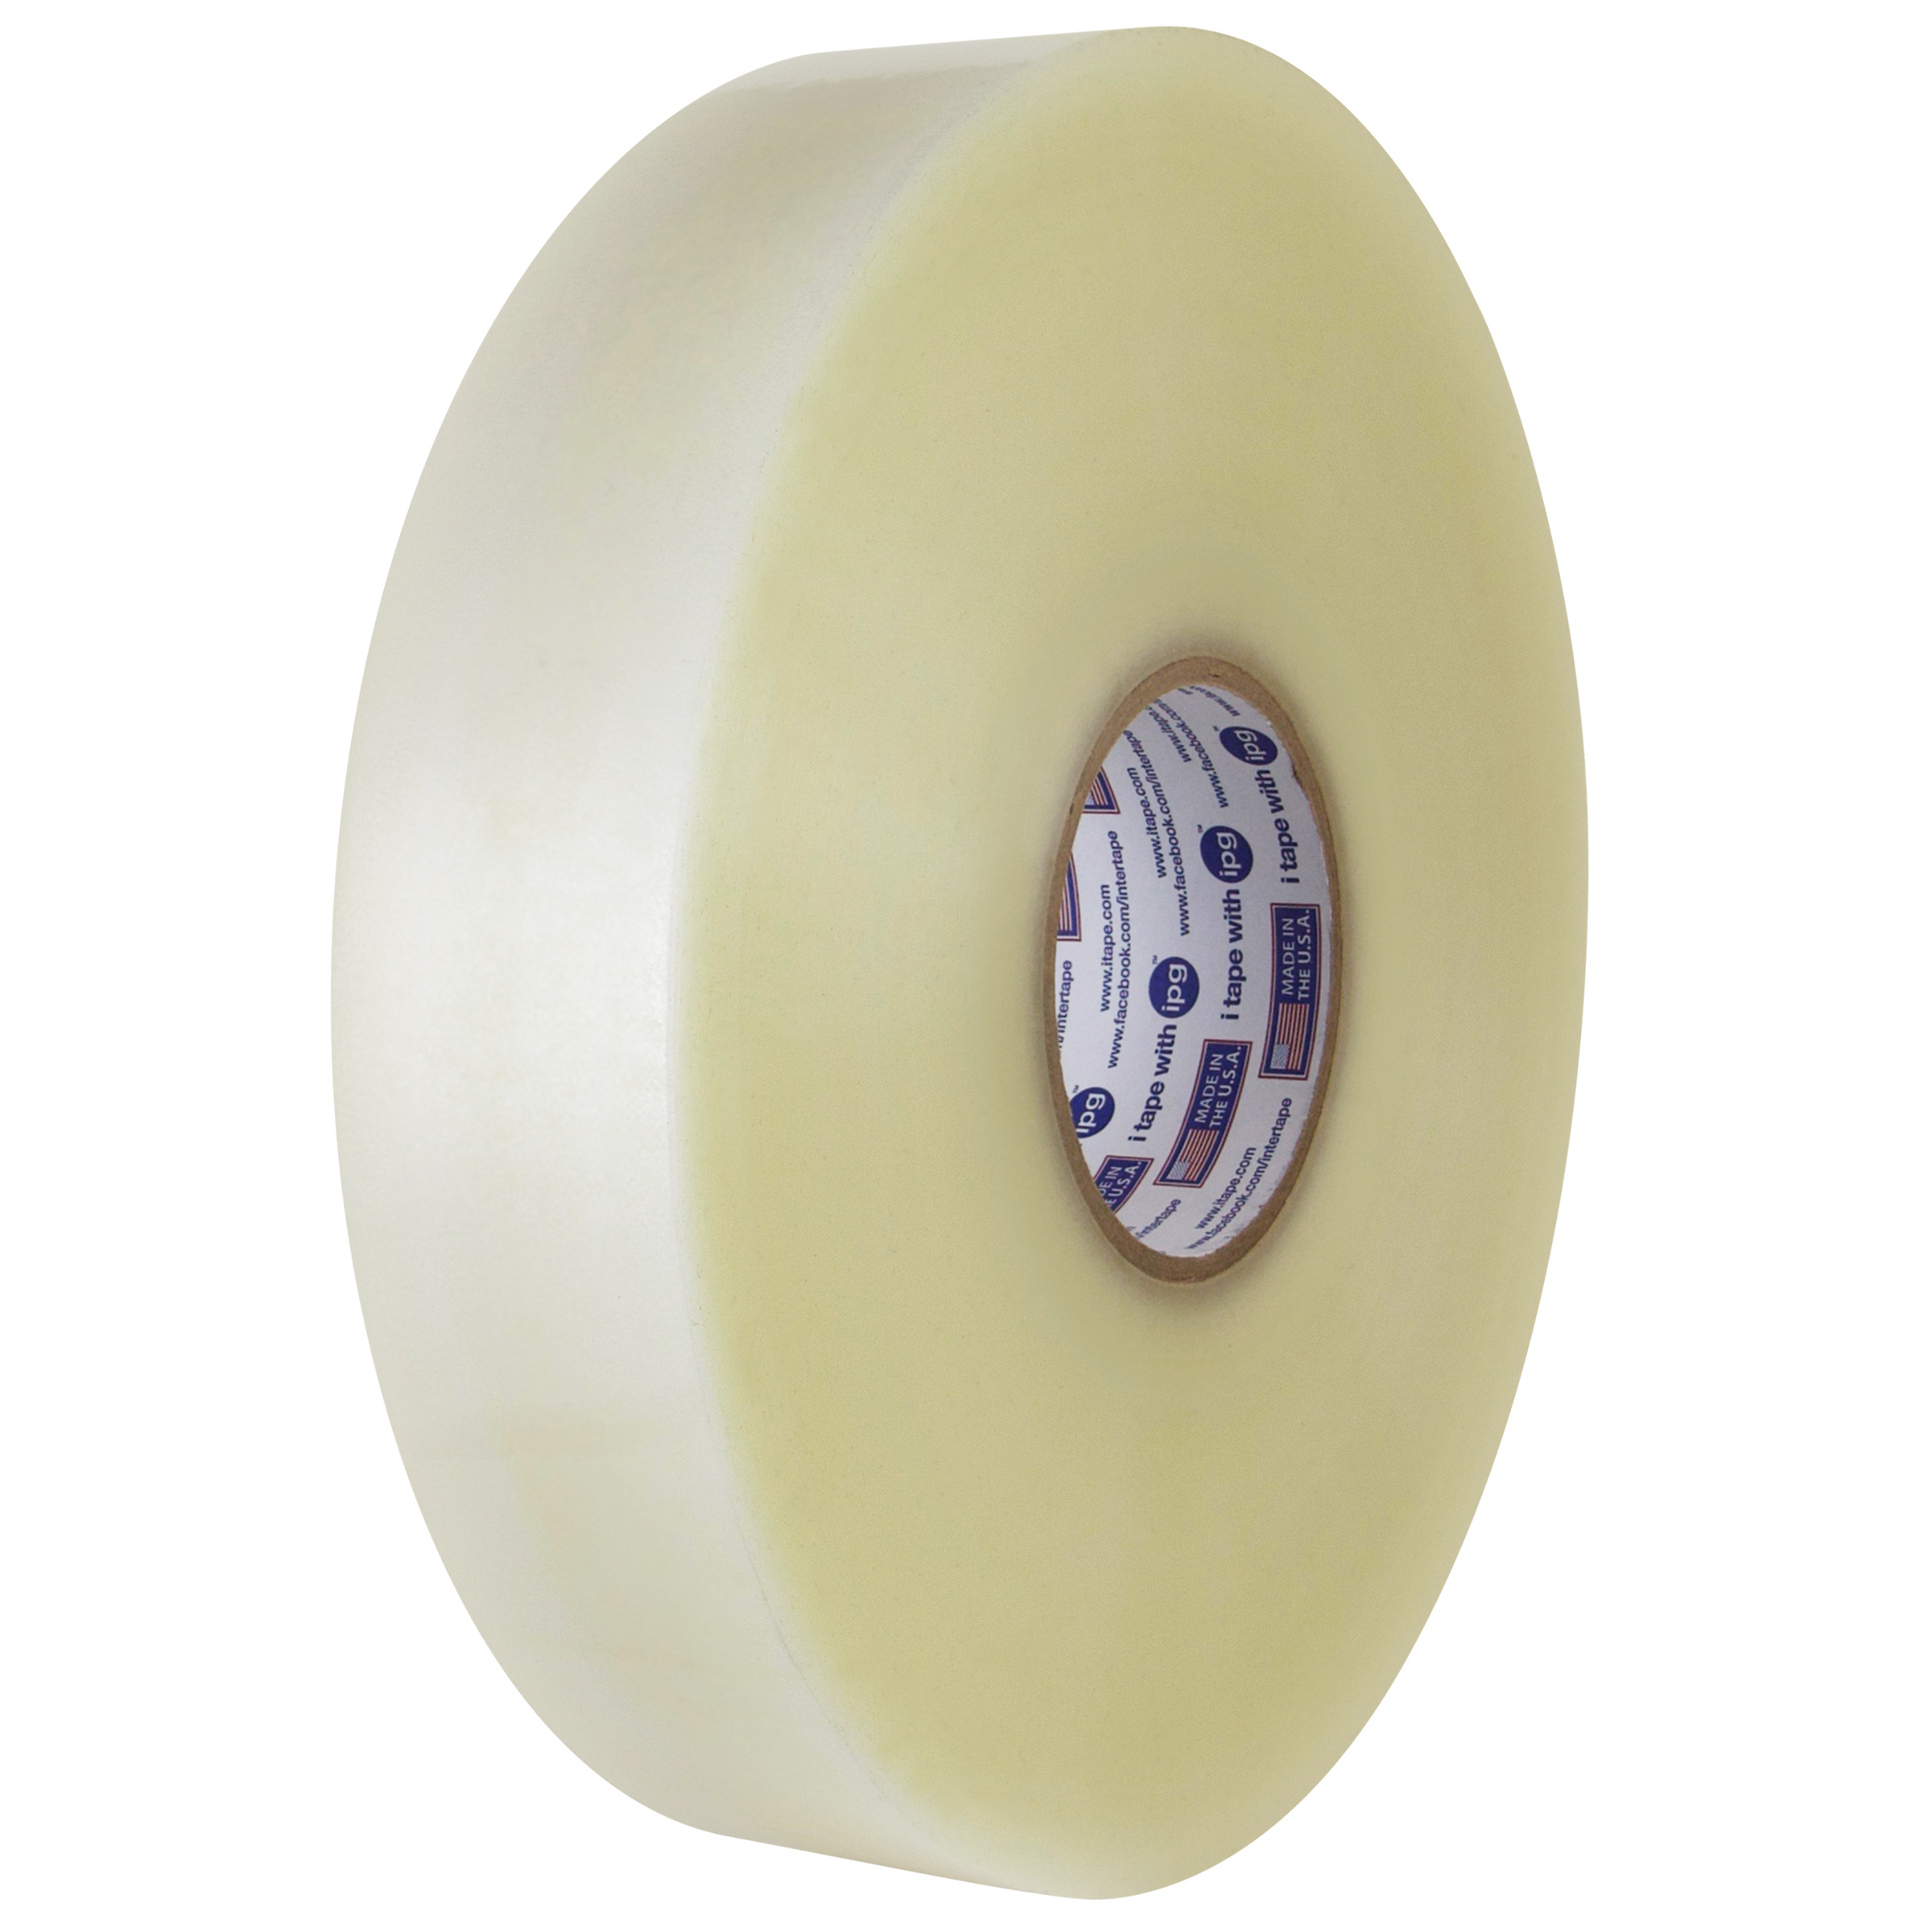 Hot Melt Tape - Tapes & Adhesives - Products